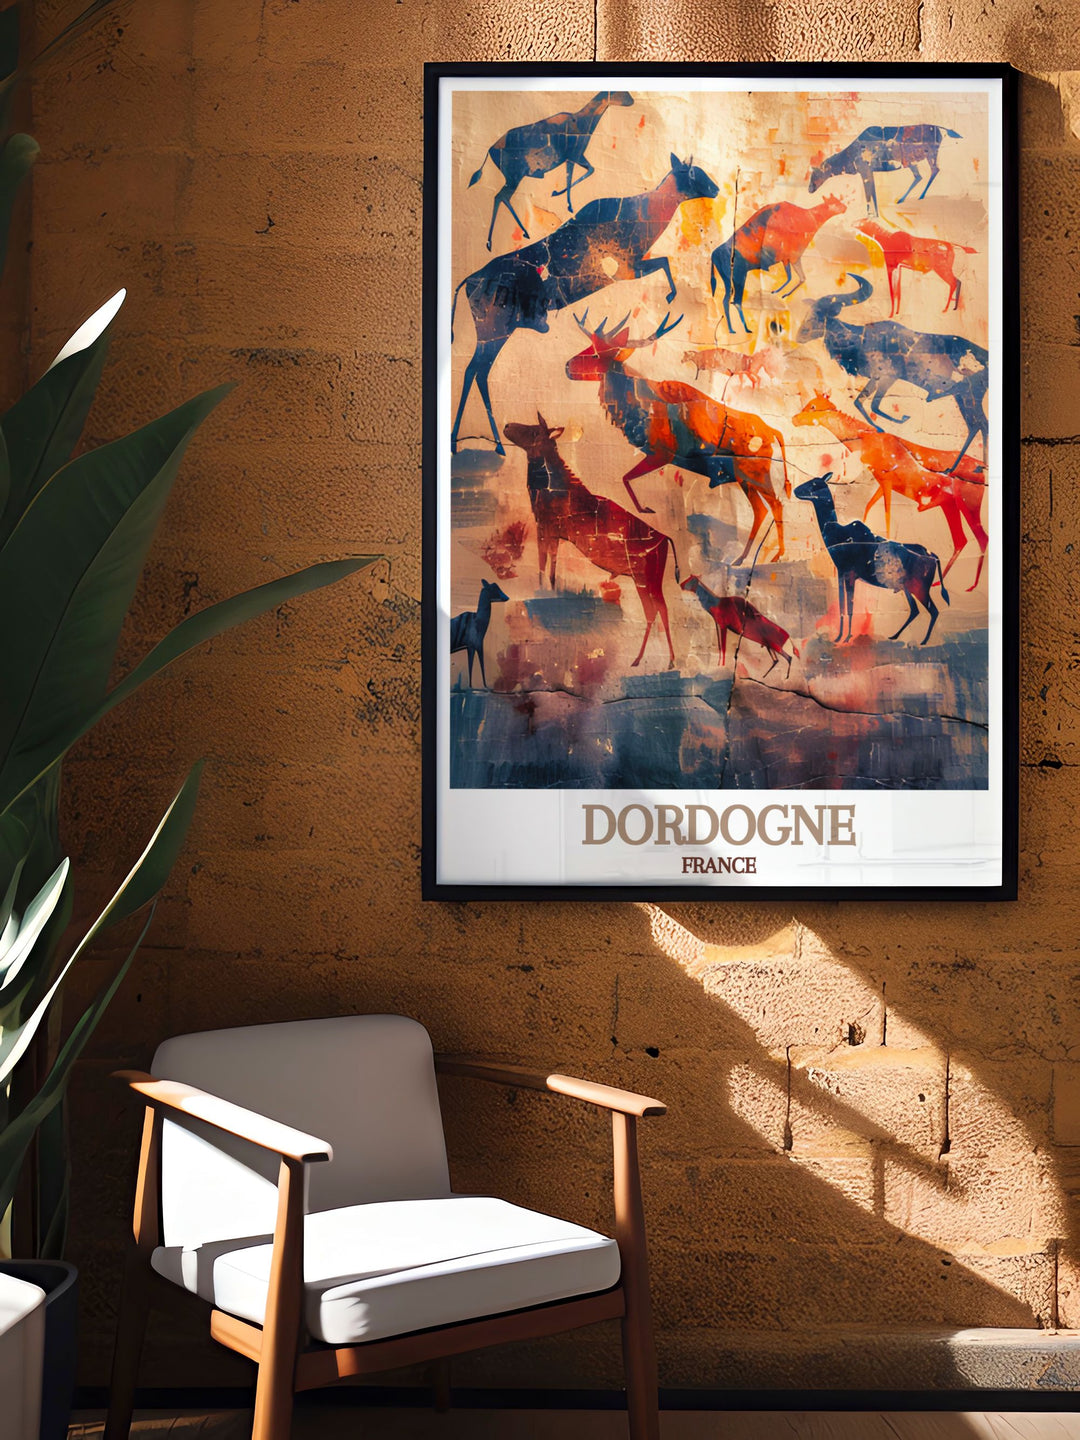 Dordognes rich historical landscape is depicted in this poster, celebrating its ancient sites and lush natural beauty, ideal for any art collection.